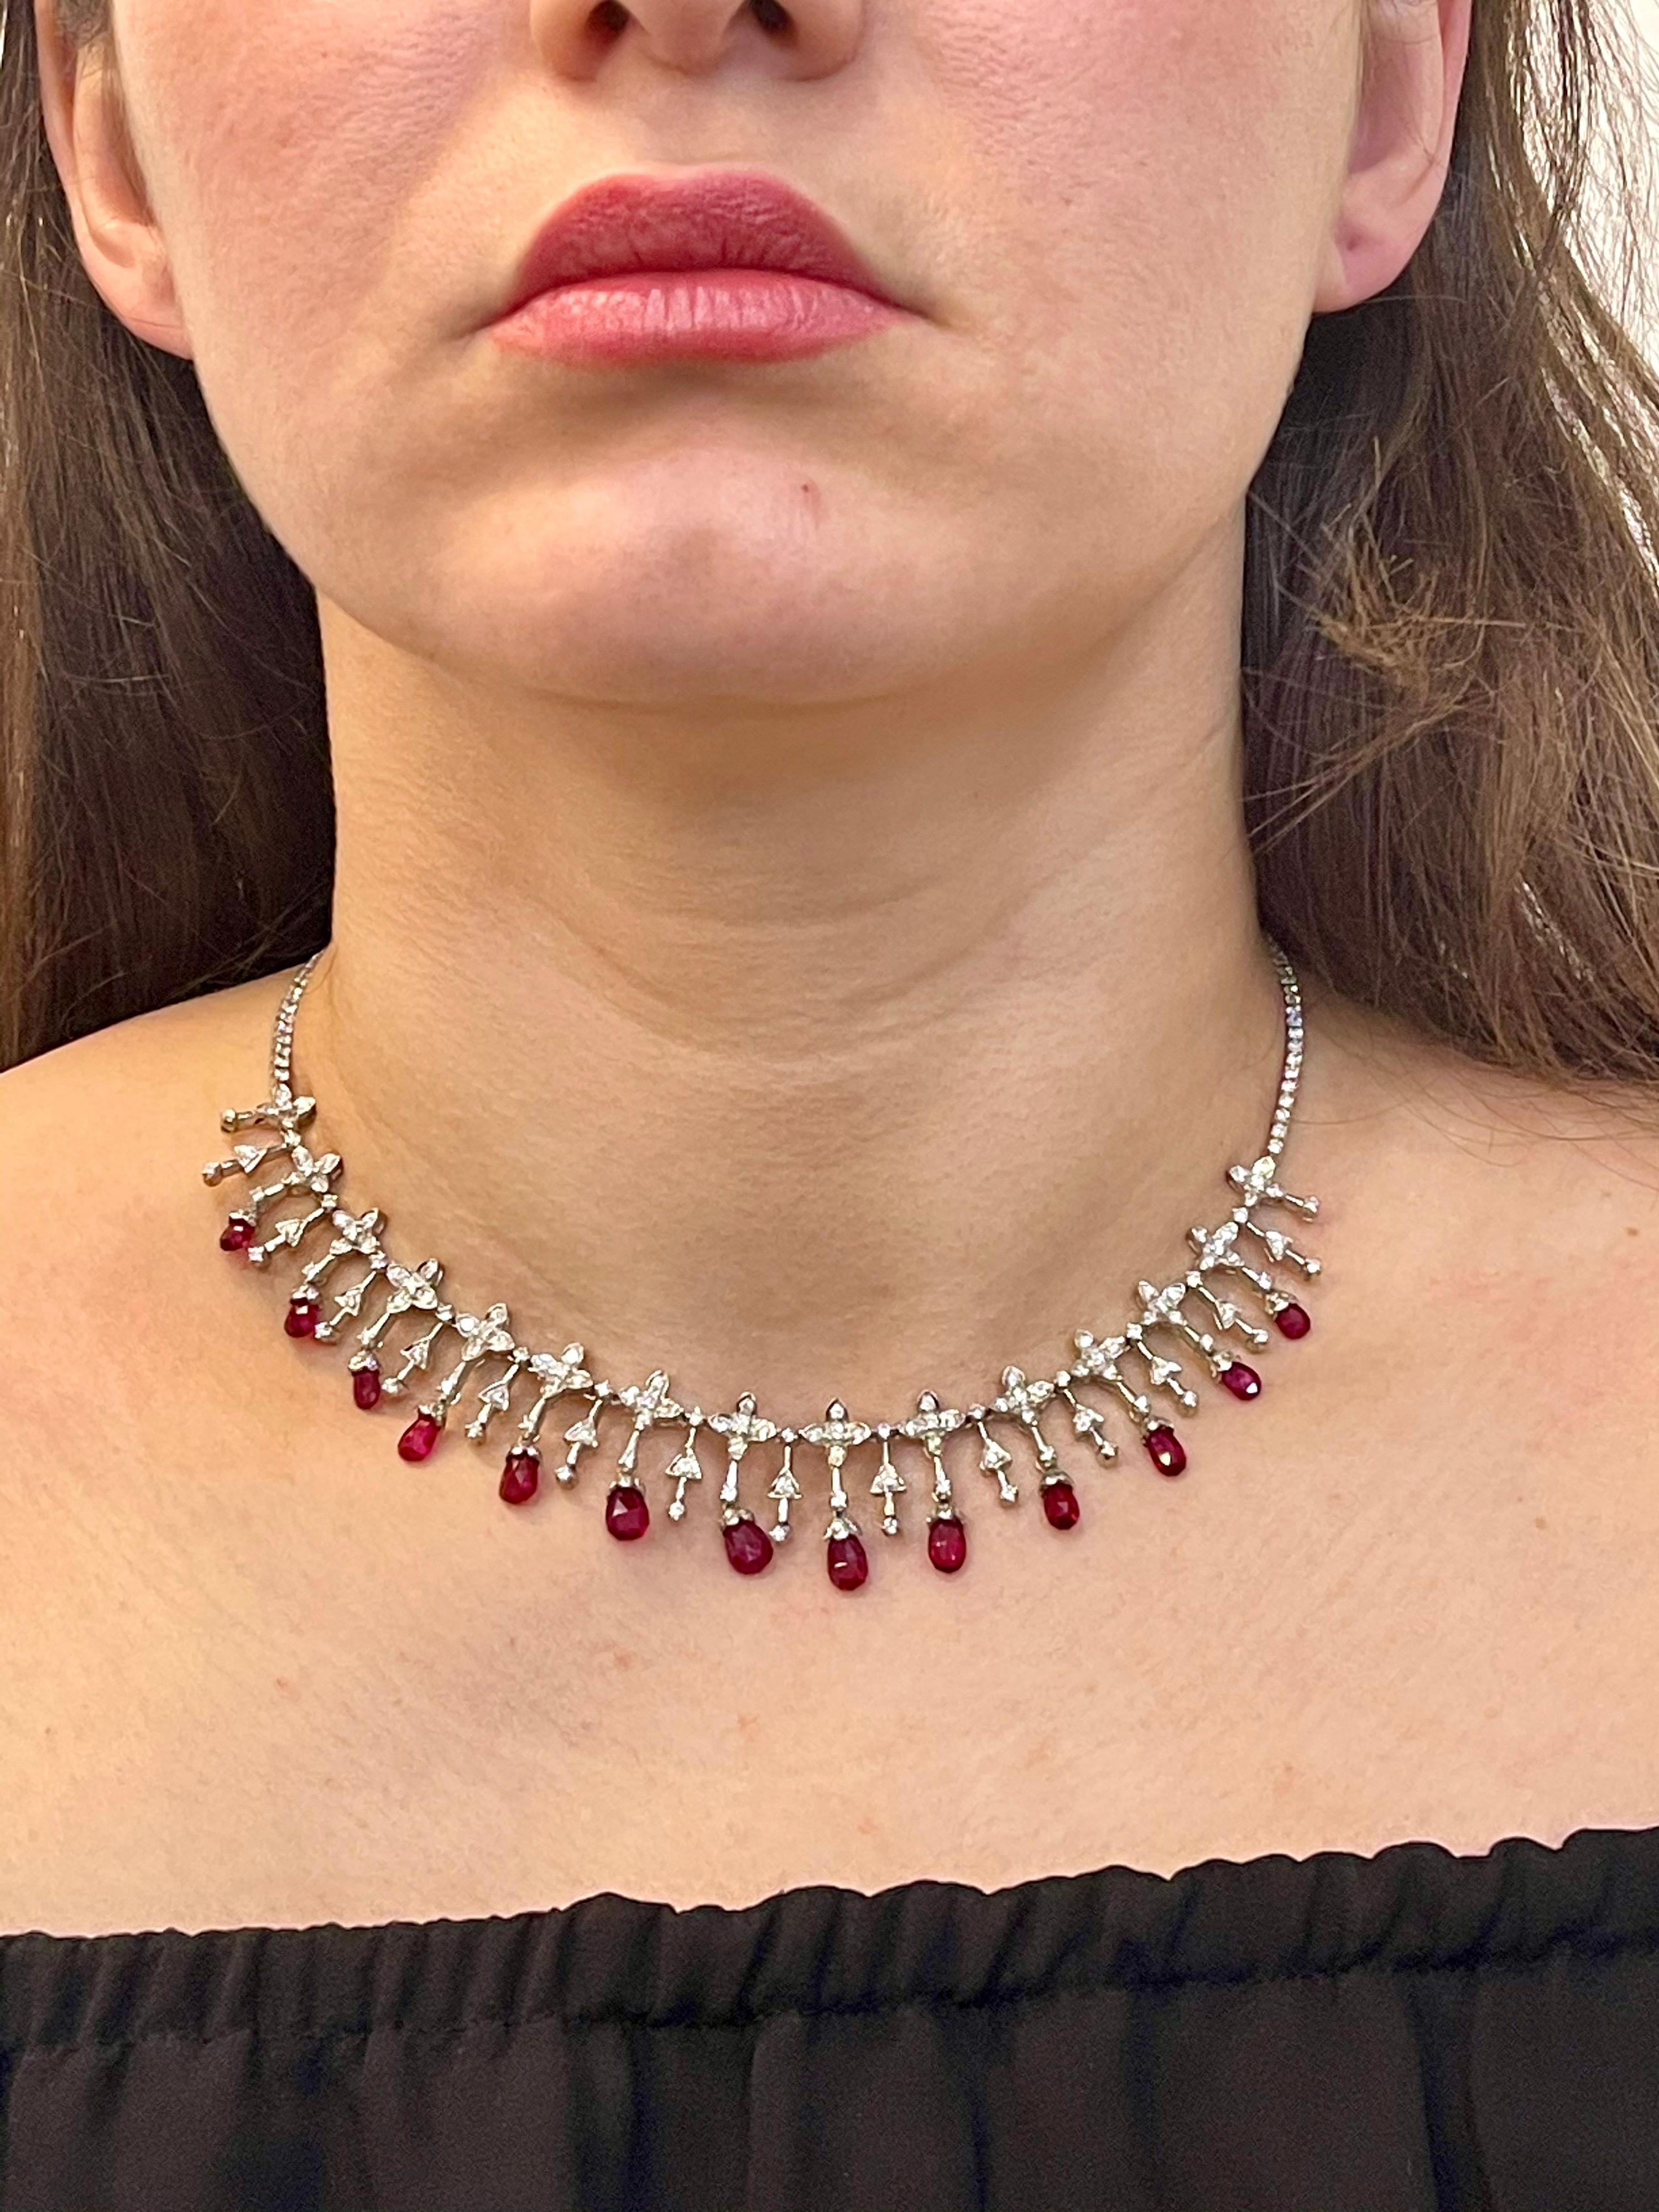 Natural Ruby Briolettes and Diamond Necklace 18 Karat White Gold, Estate 3